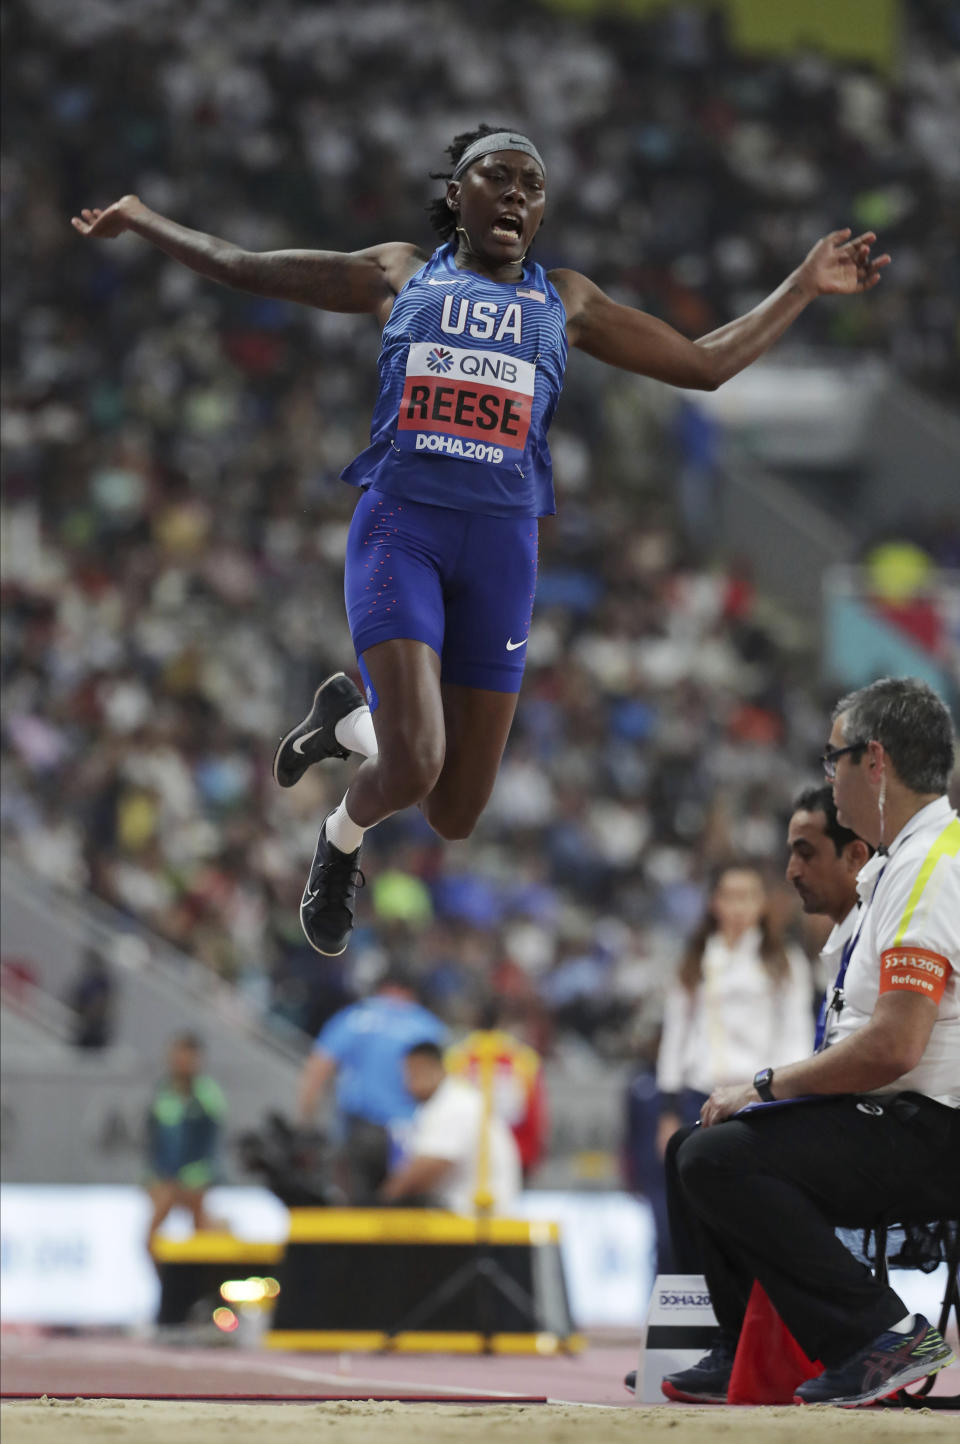 Brittney Reese, of the United States, competes in the women's long jump qualification at the World Athletics Championships in Doha, Qatar, Saturday, Oct. 5, 2019. (AP Photo/Hassan Ammar)